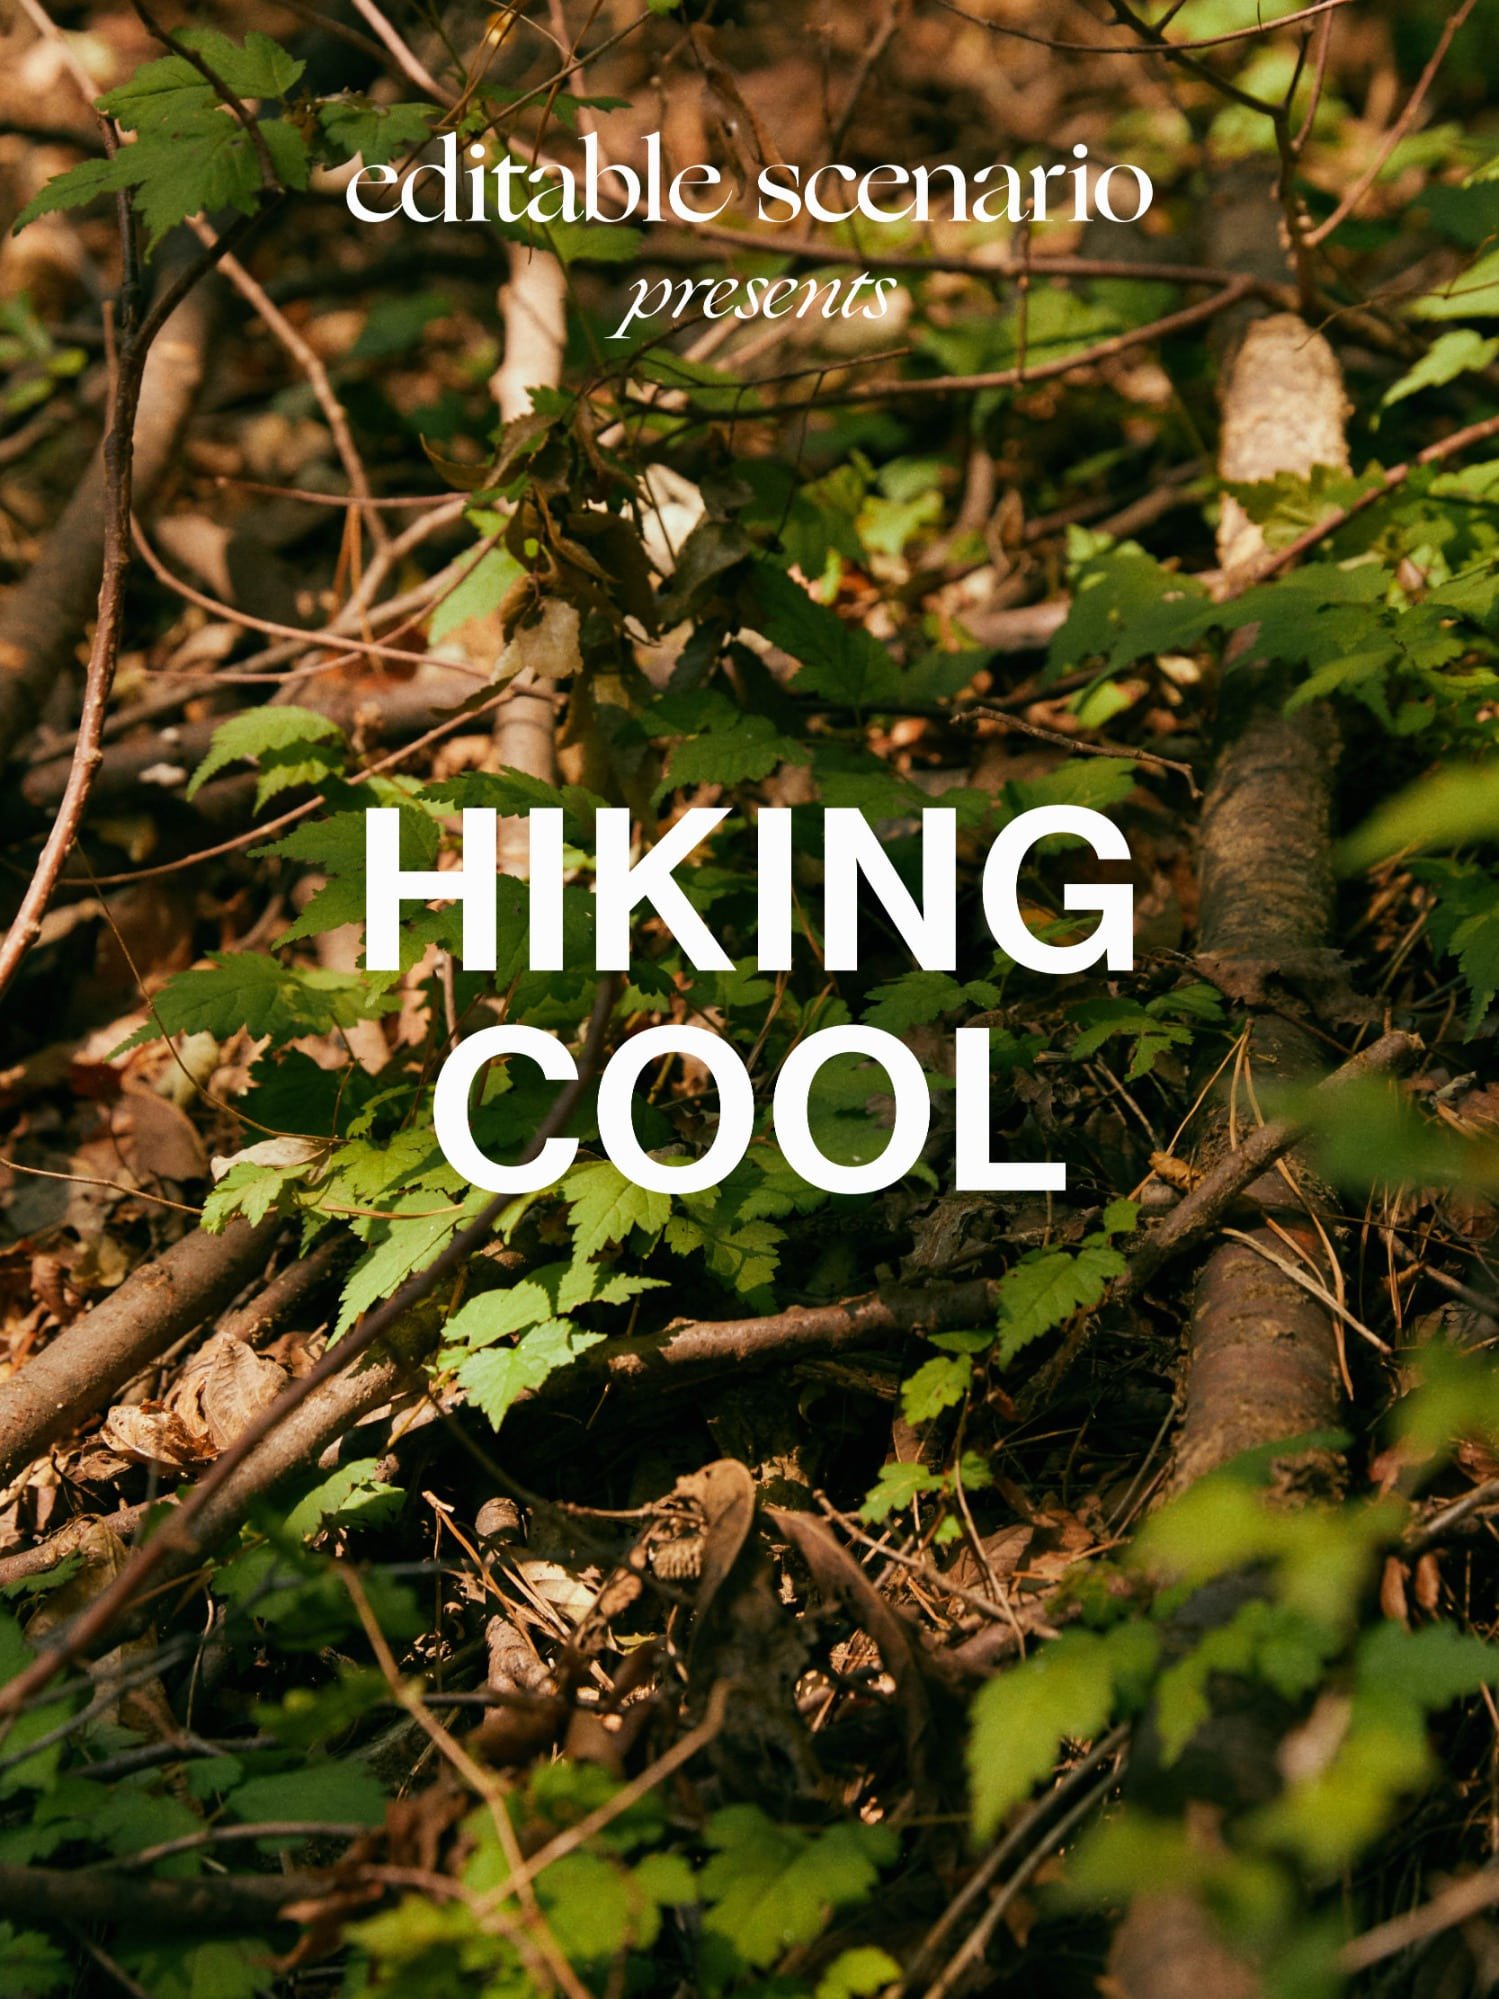 HIKING COOL EVENT